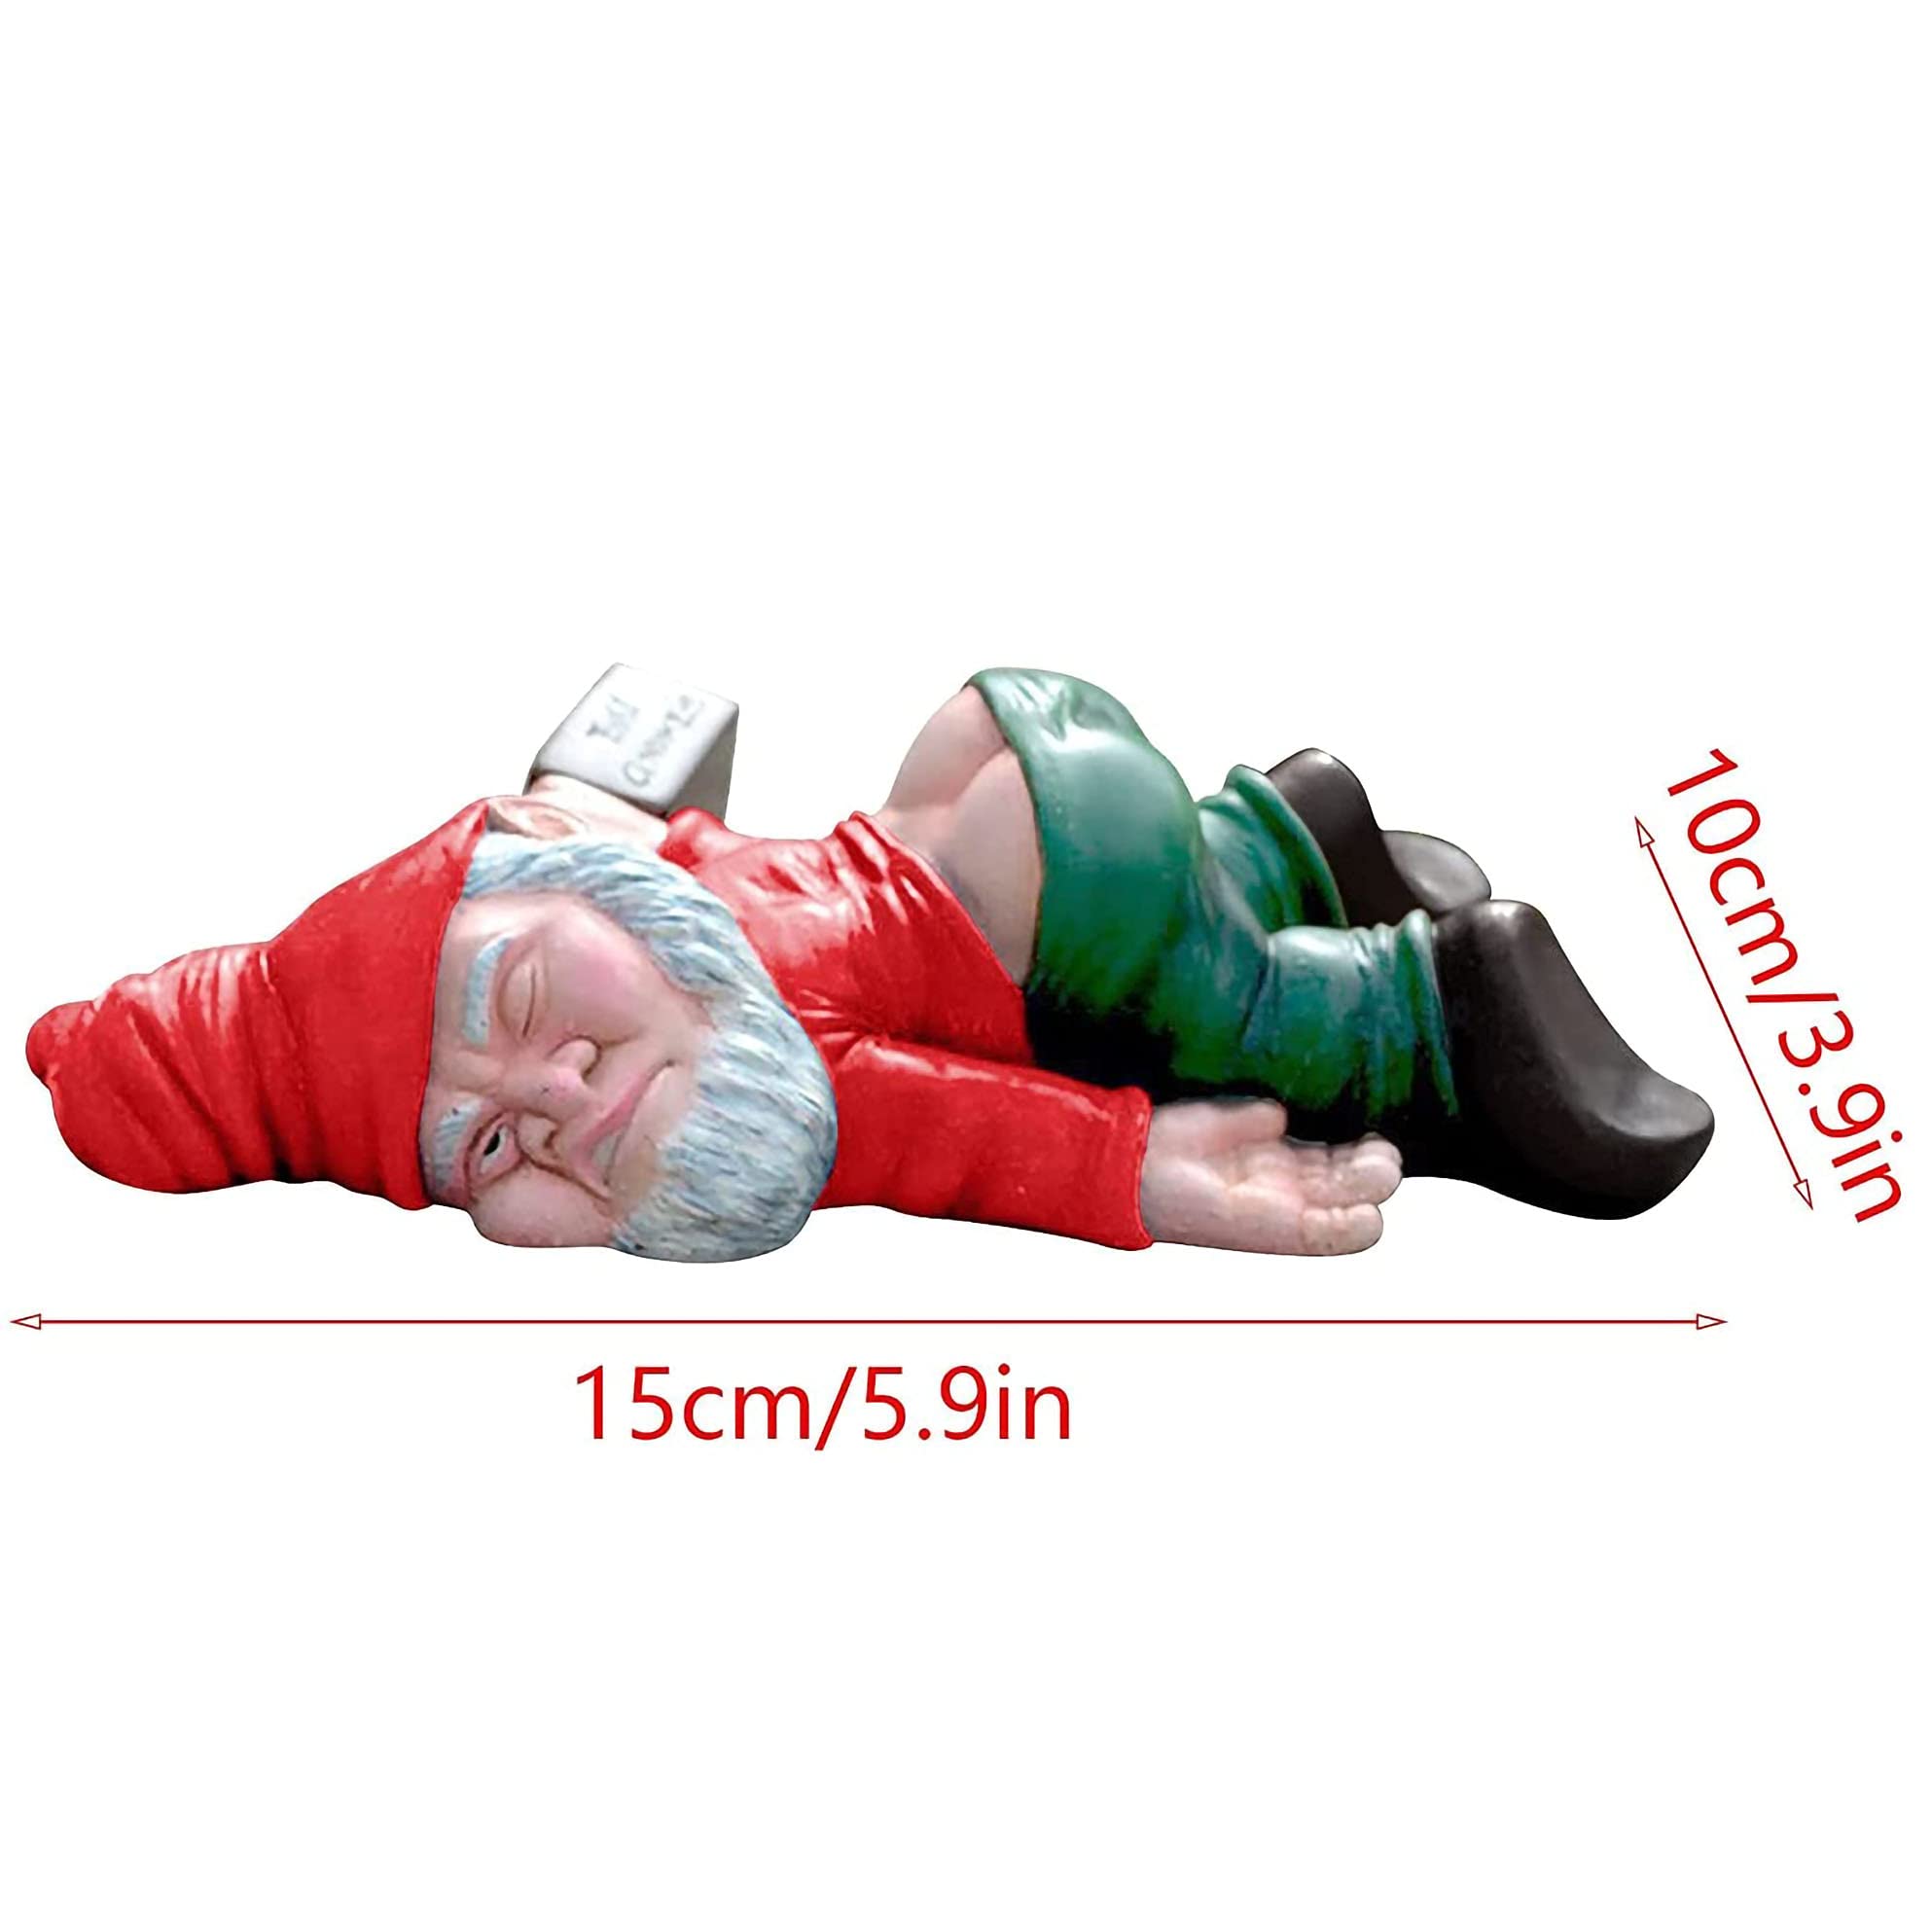 IcyAits Funny Drunk Dwarf Garden Gnome Statues Decoration, Creative Statue Resin Sculpture Novelty Gift for Outdoor Indoor Patio Yard Lawn Porch Ornament Decor